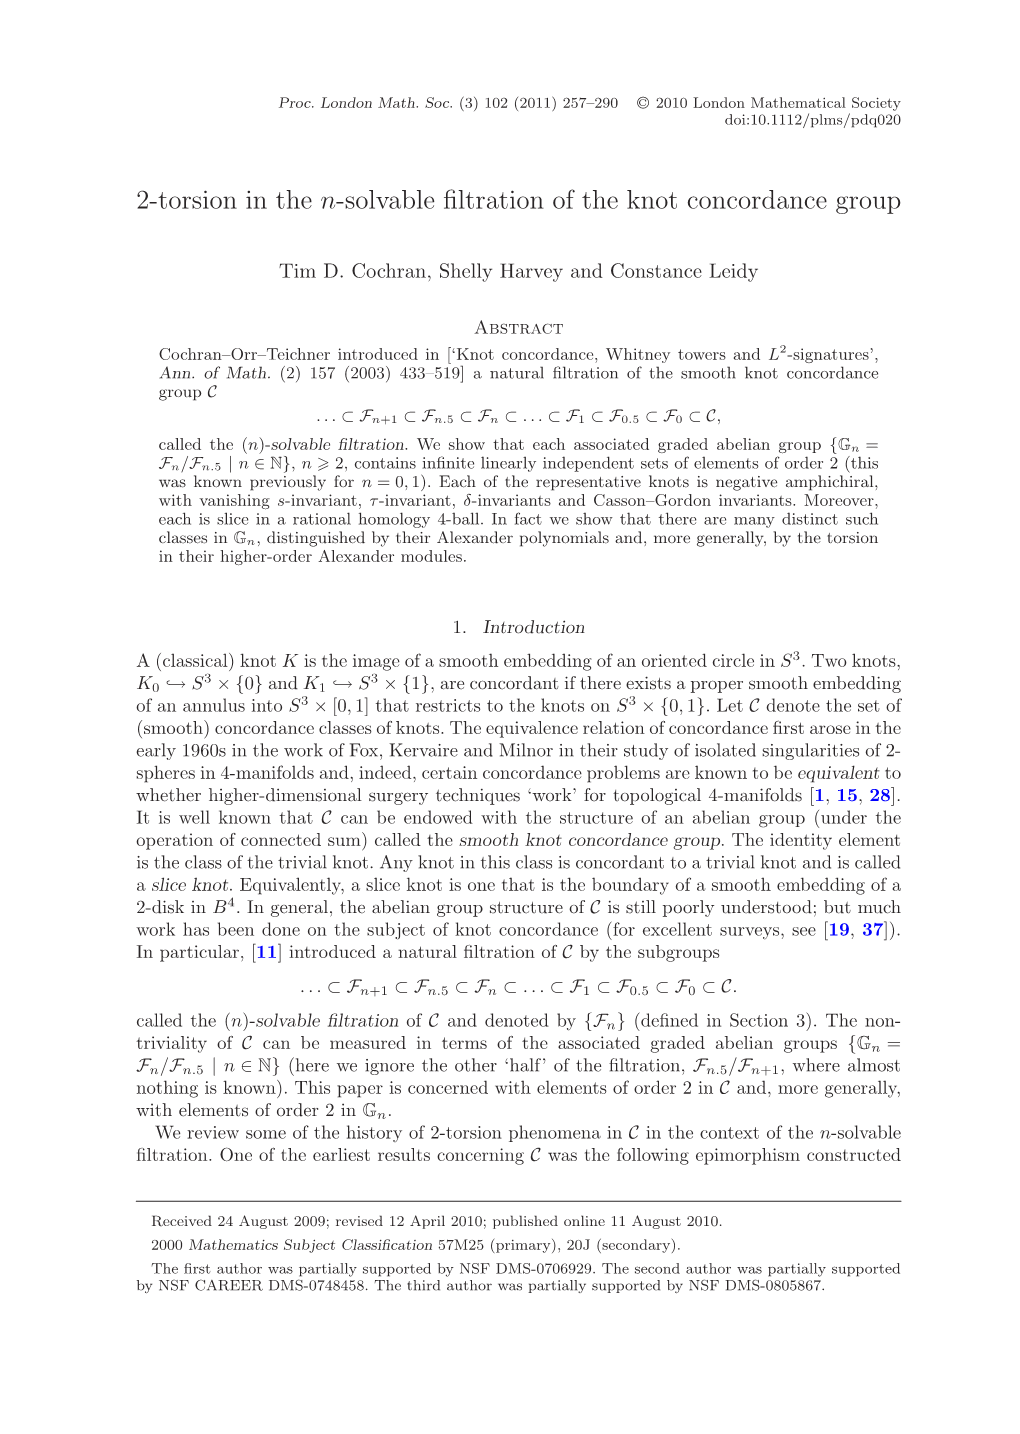 2-Torsion in the N-Solvable ﬁltration of the Knot Concordance Group